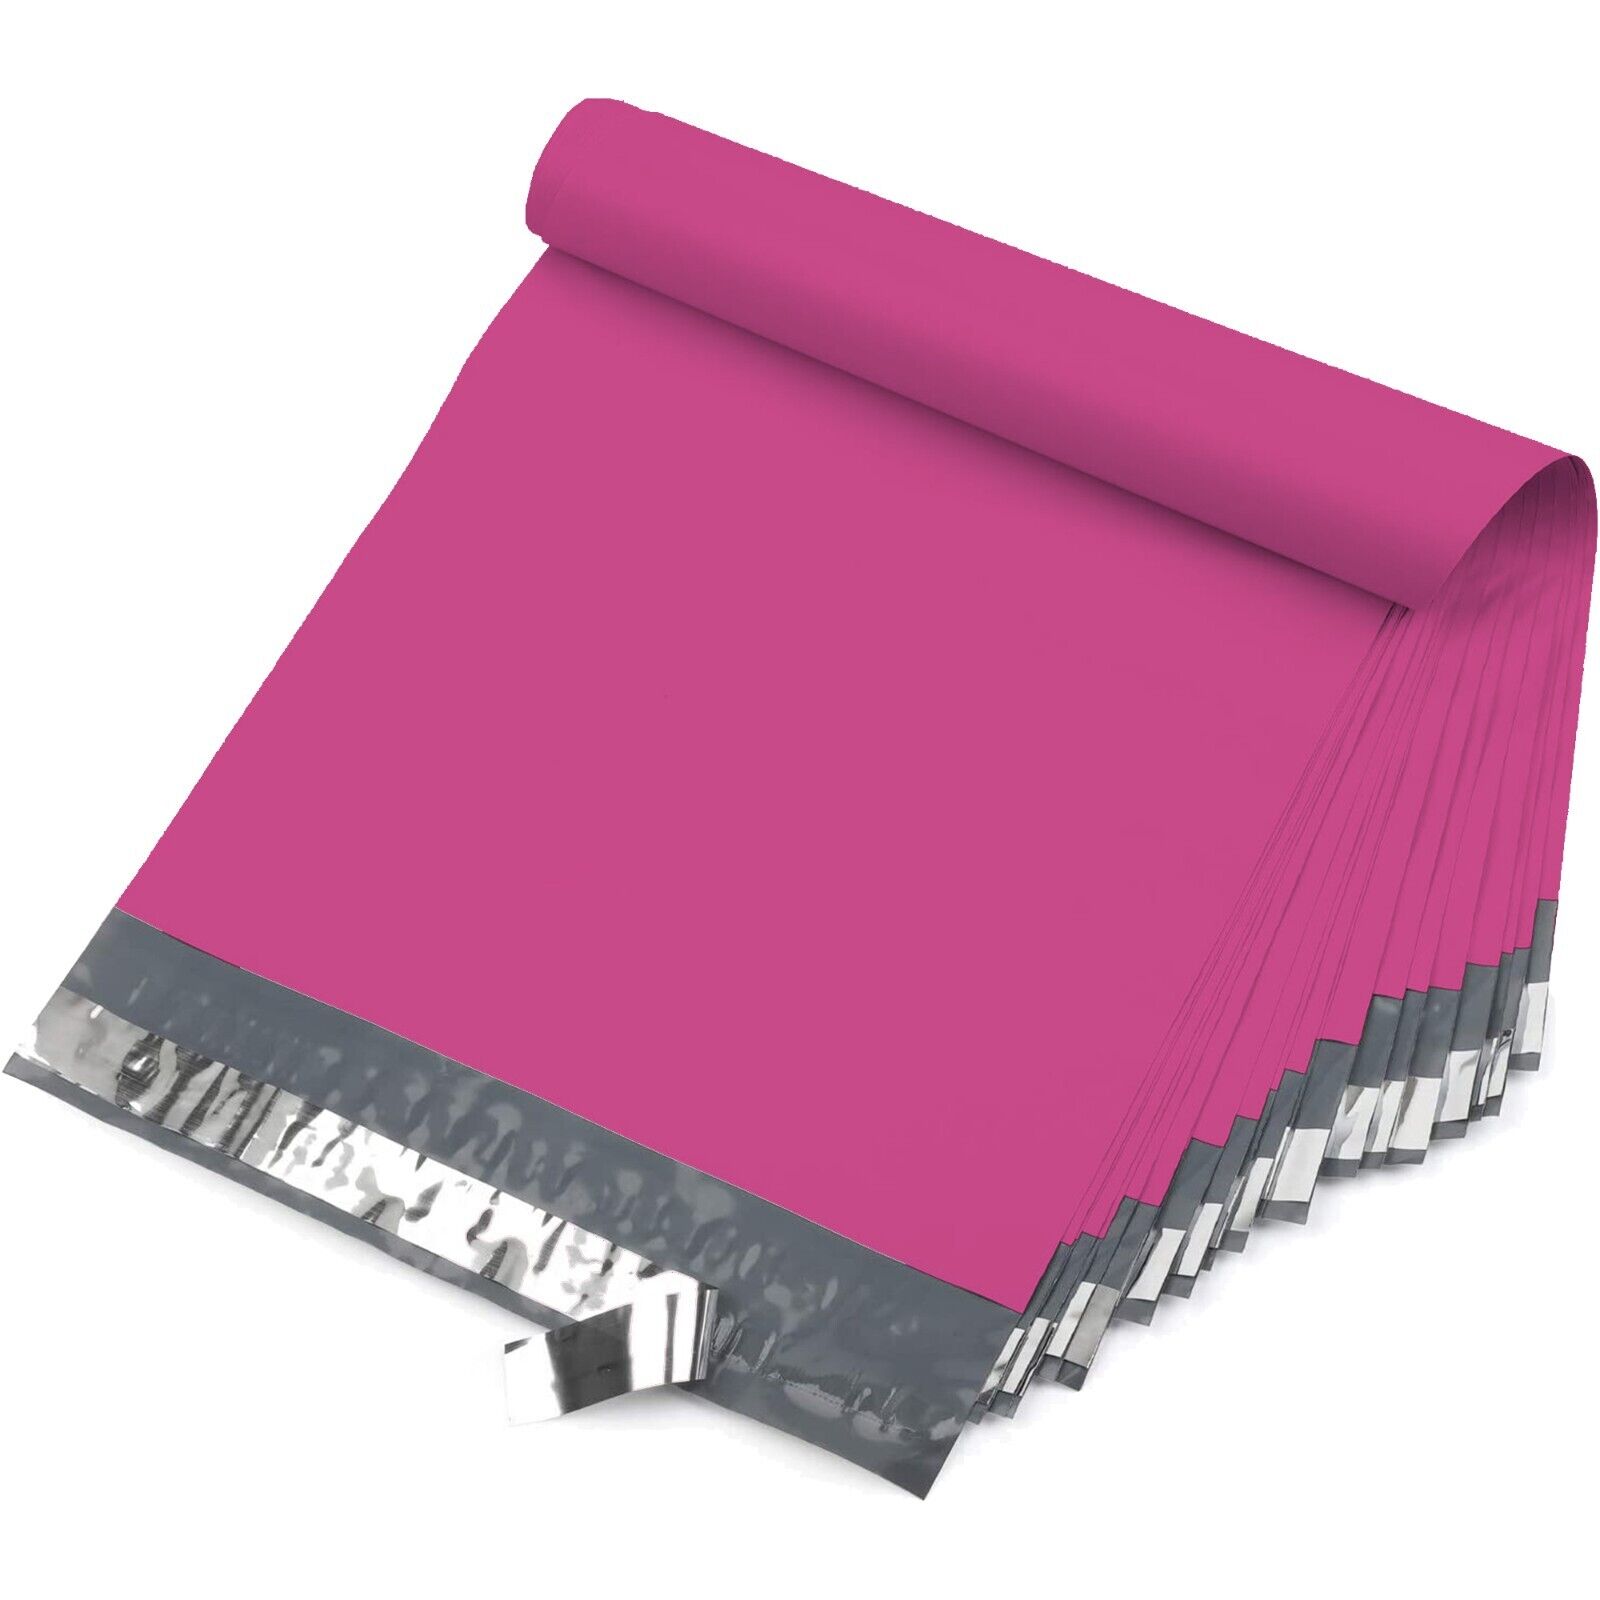 10X13 M4-1000pcs POLY MAILERS SHIPPING ENVELOPES PLASTIC BAGS-Hot Pink